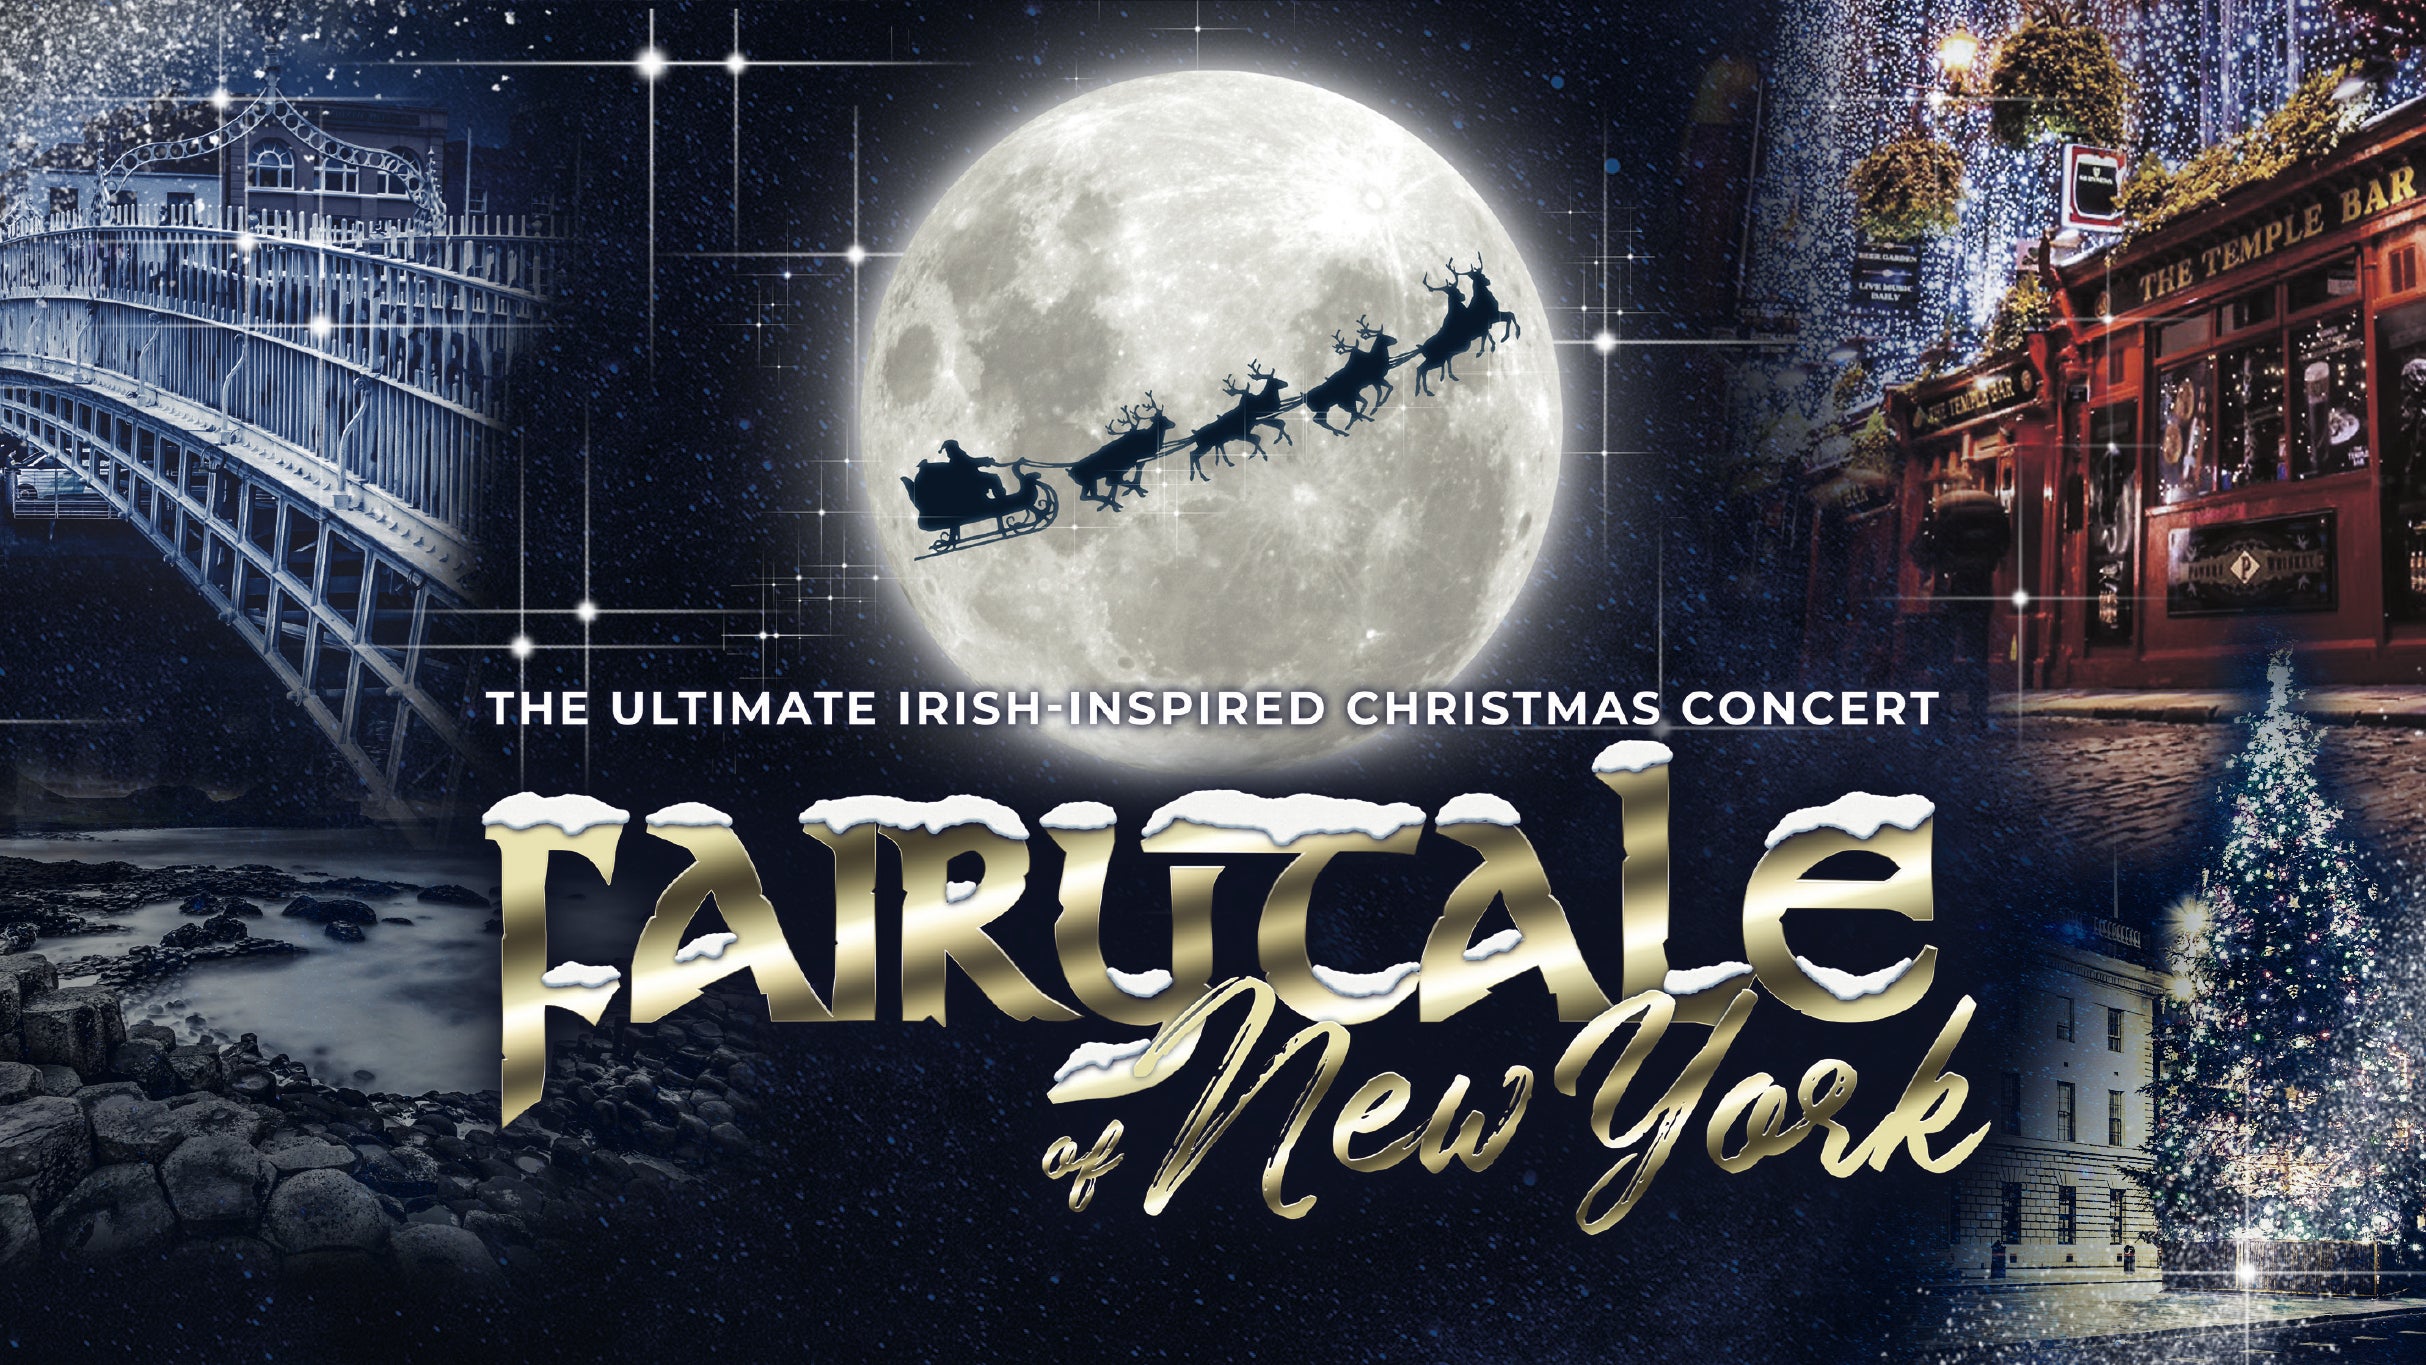 Fairytale of New York - Coming Home for Christmas in Birmingham promo photo for Ticketmaster presale offer code